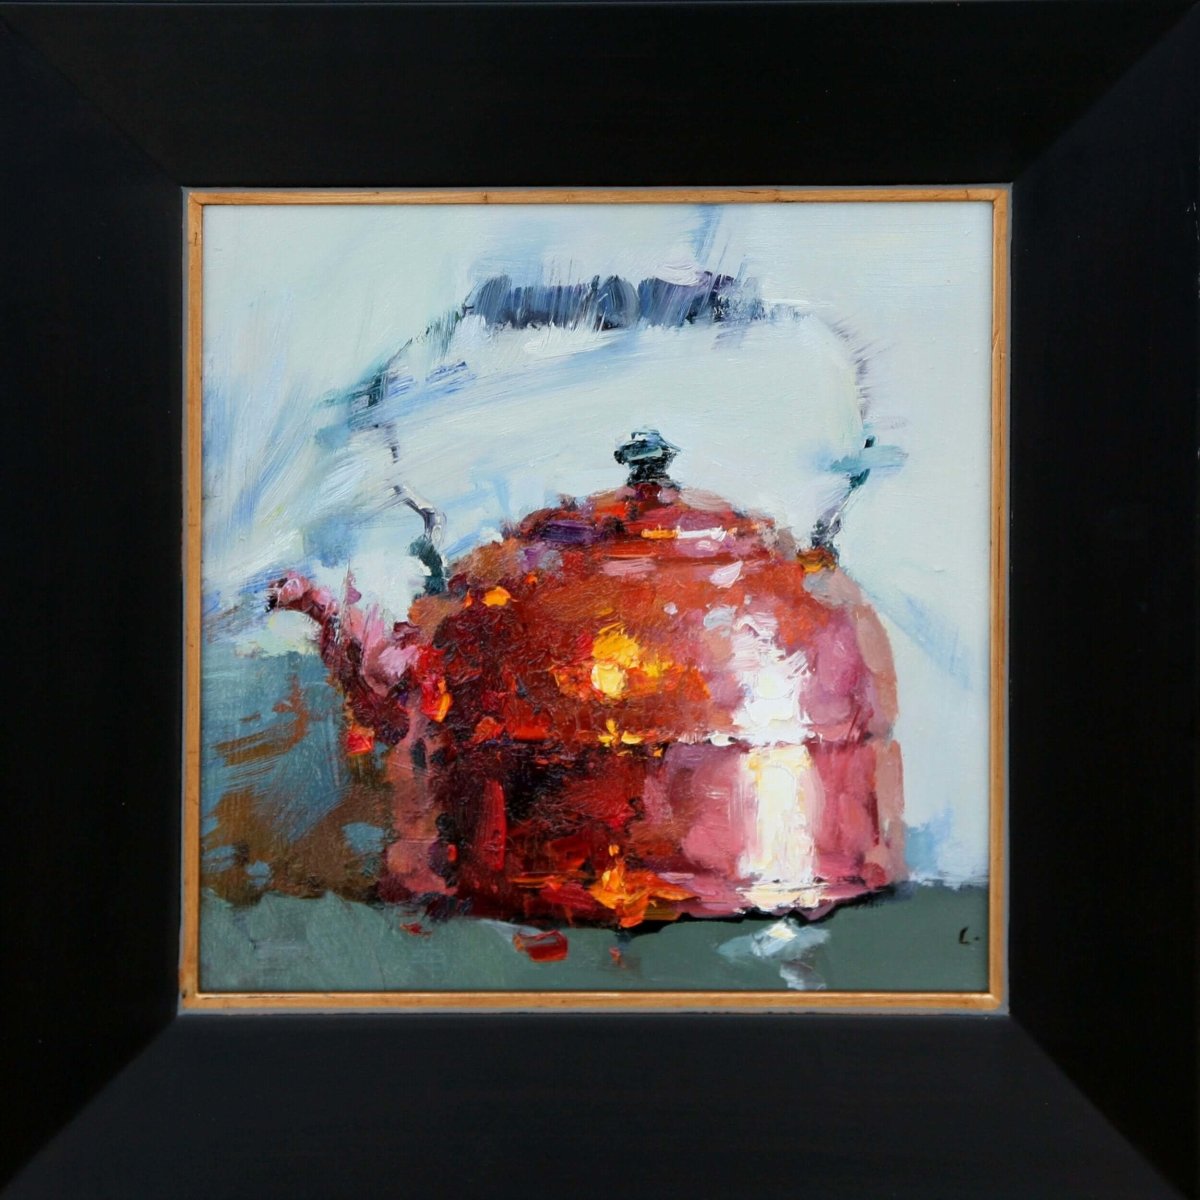 Copper Kettle by Ning Lee at LePrince Galleries